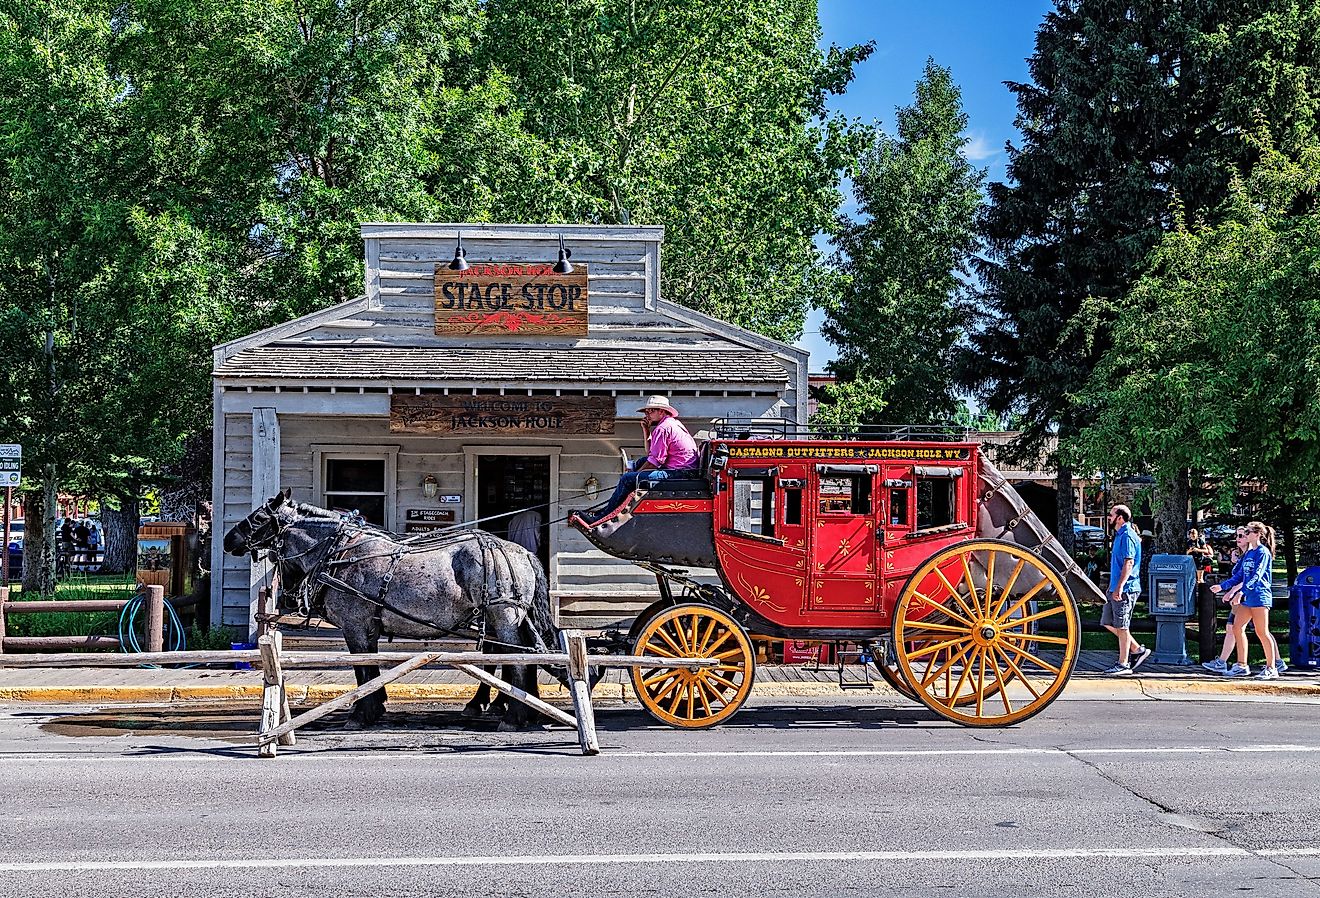 Stage Stop in downtown Jackson, Wyoming. Image credit randy andy via Shutterstock